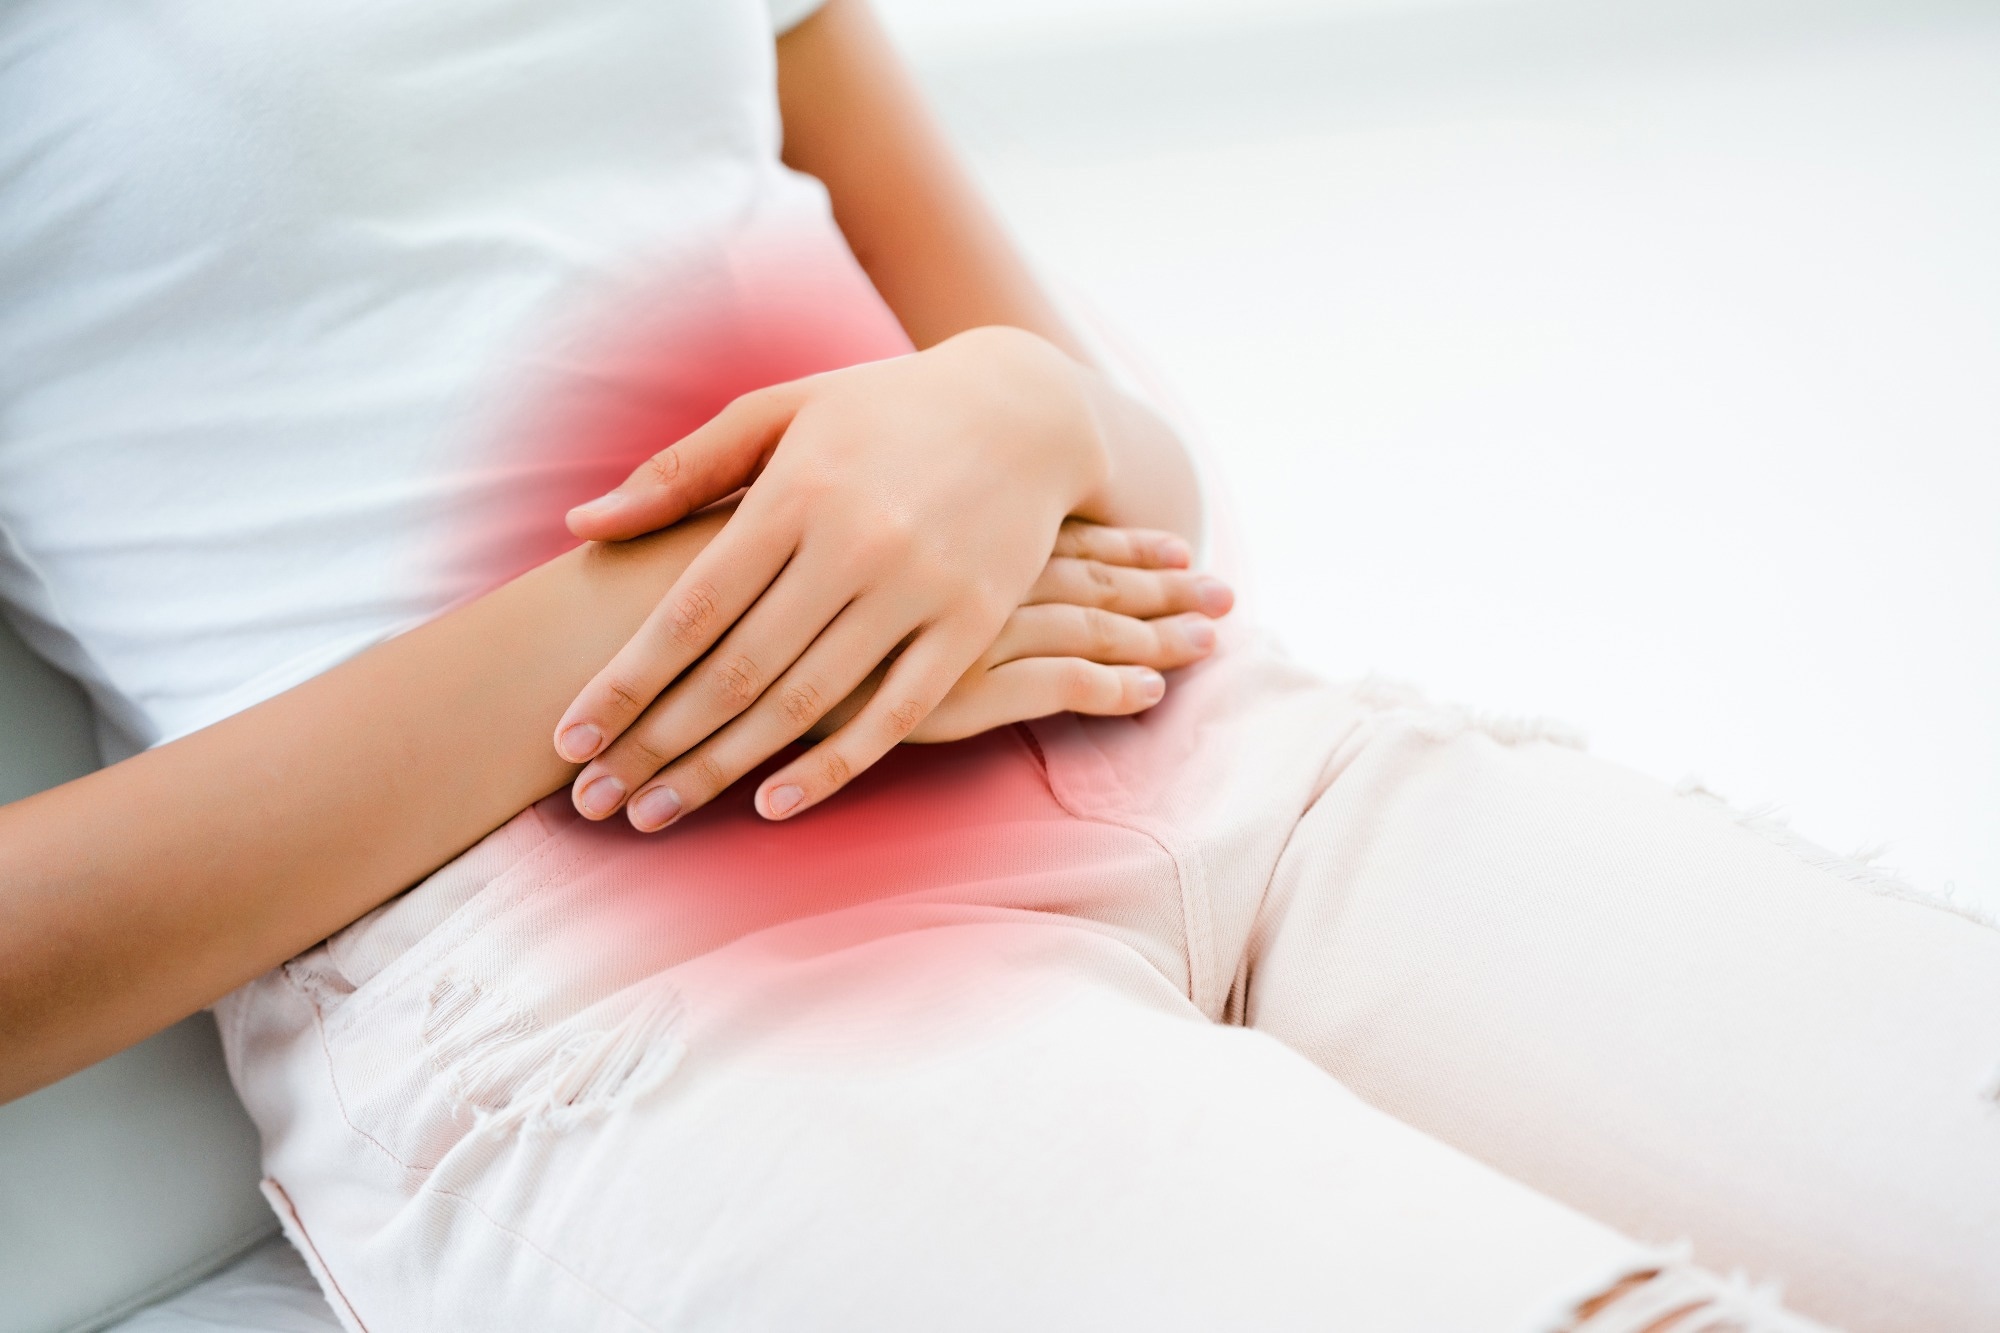 Cannabis shows promise in easing endometriosis pain, new research suggests